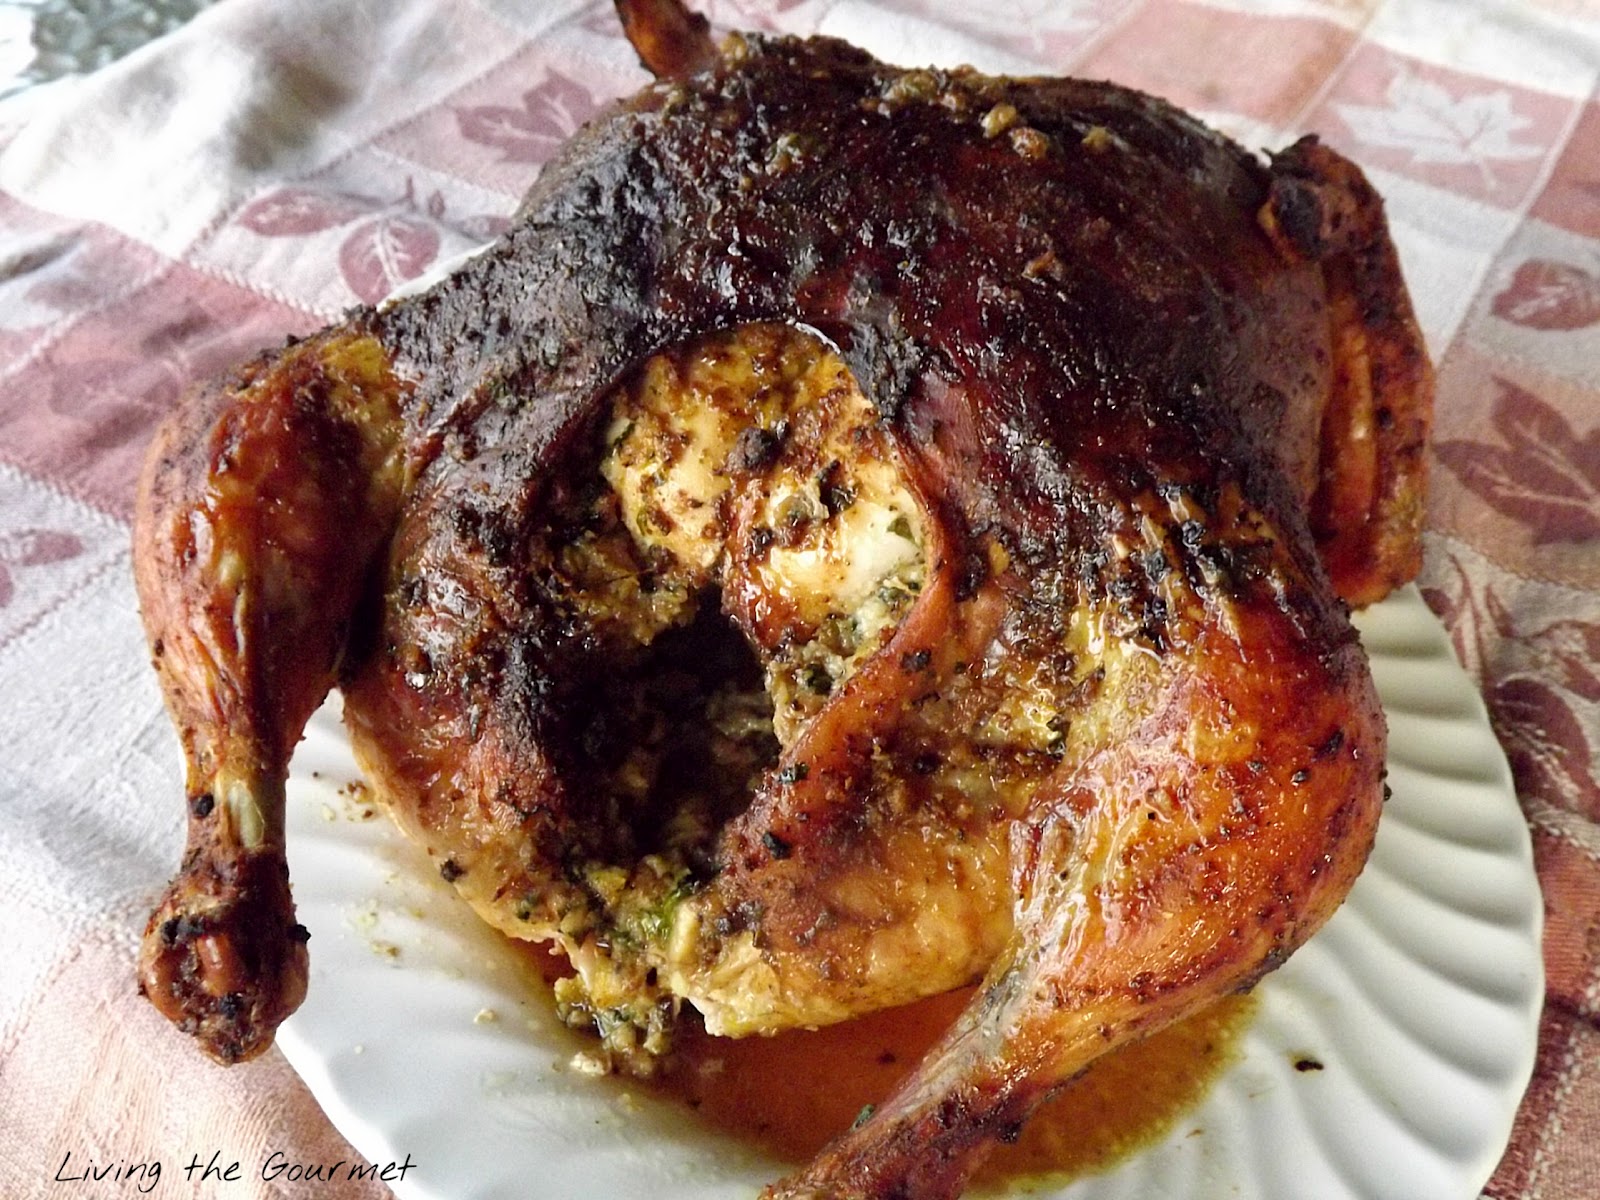 Recipe of The Week: Brined Roast Stuffed Chicken with Spinach